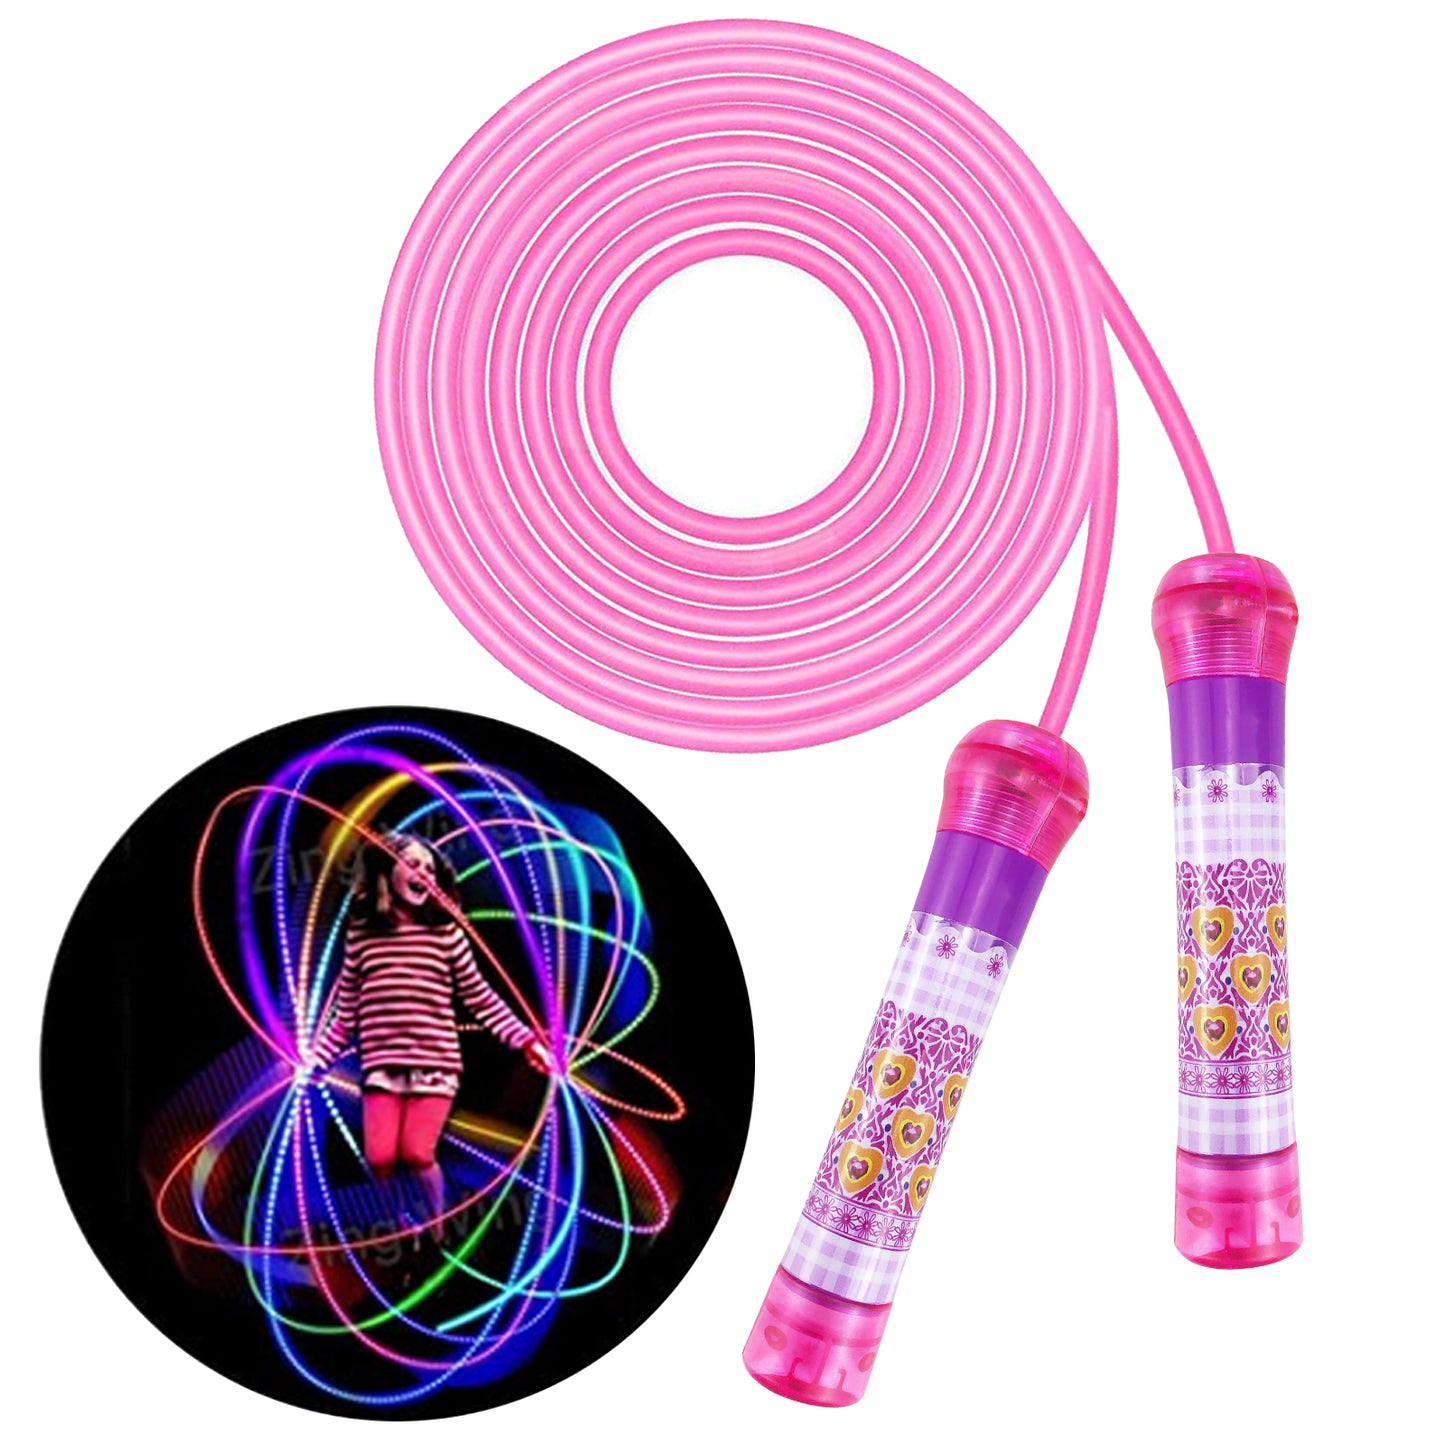 Jump Rope for Kids Ages 4-8-12+, Adjustable Size Led Jump Rope Light Up Skipping Rope with Colorful Lights for Teens Adults Glow Party Favor Outdoor Indoor Exercise Fitness Activity - Pink